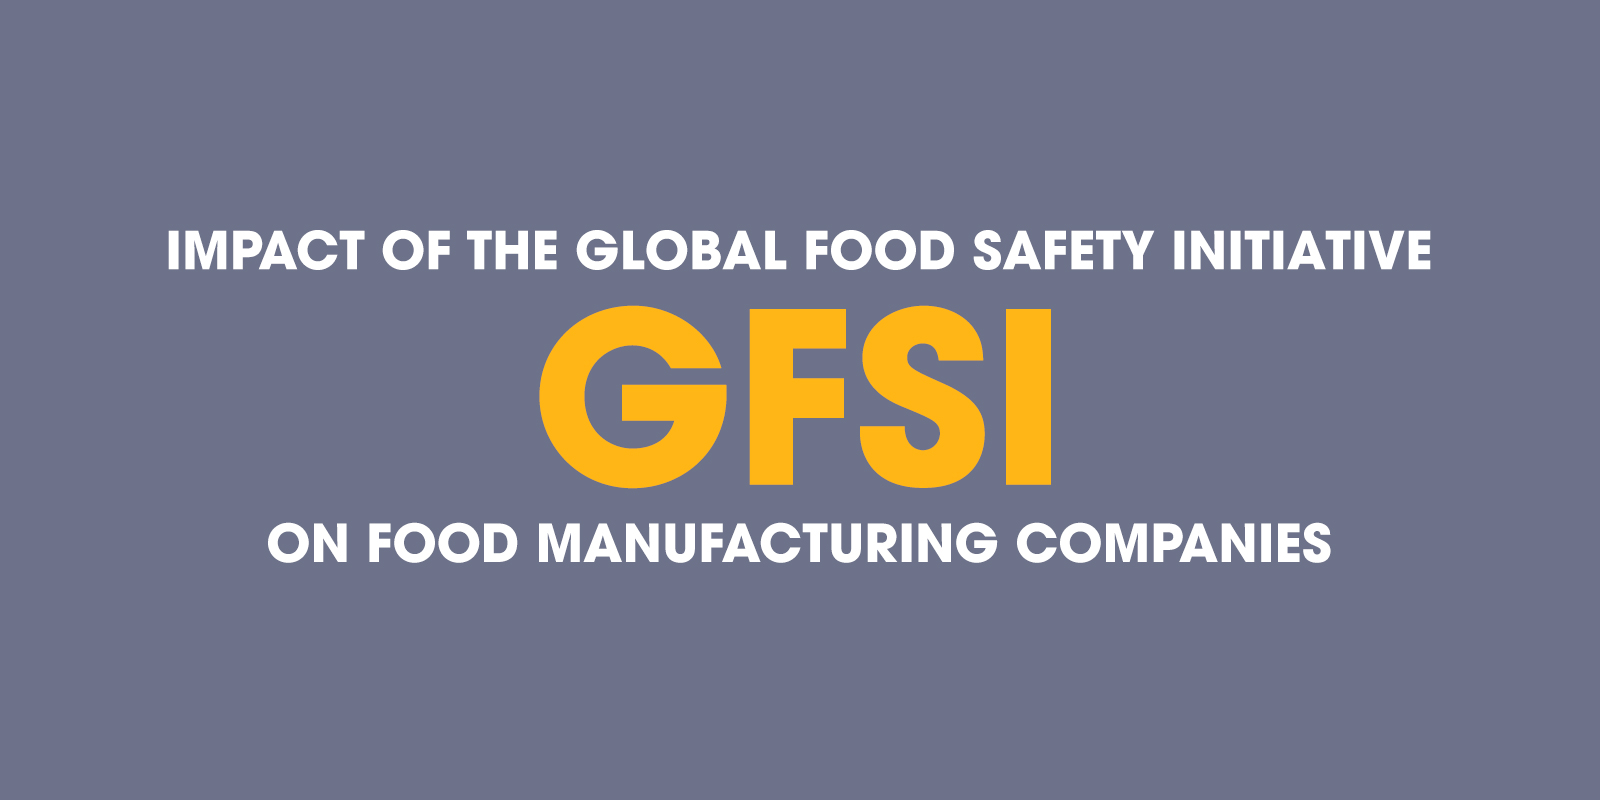 Impact of Global Food Safety Initiative on Food Manufacturing Companies